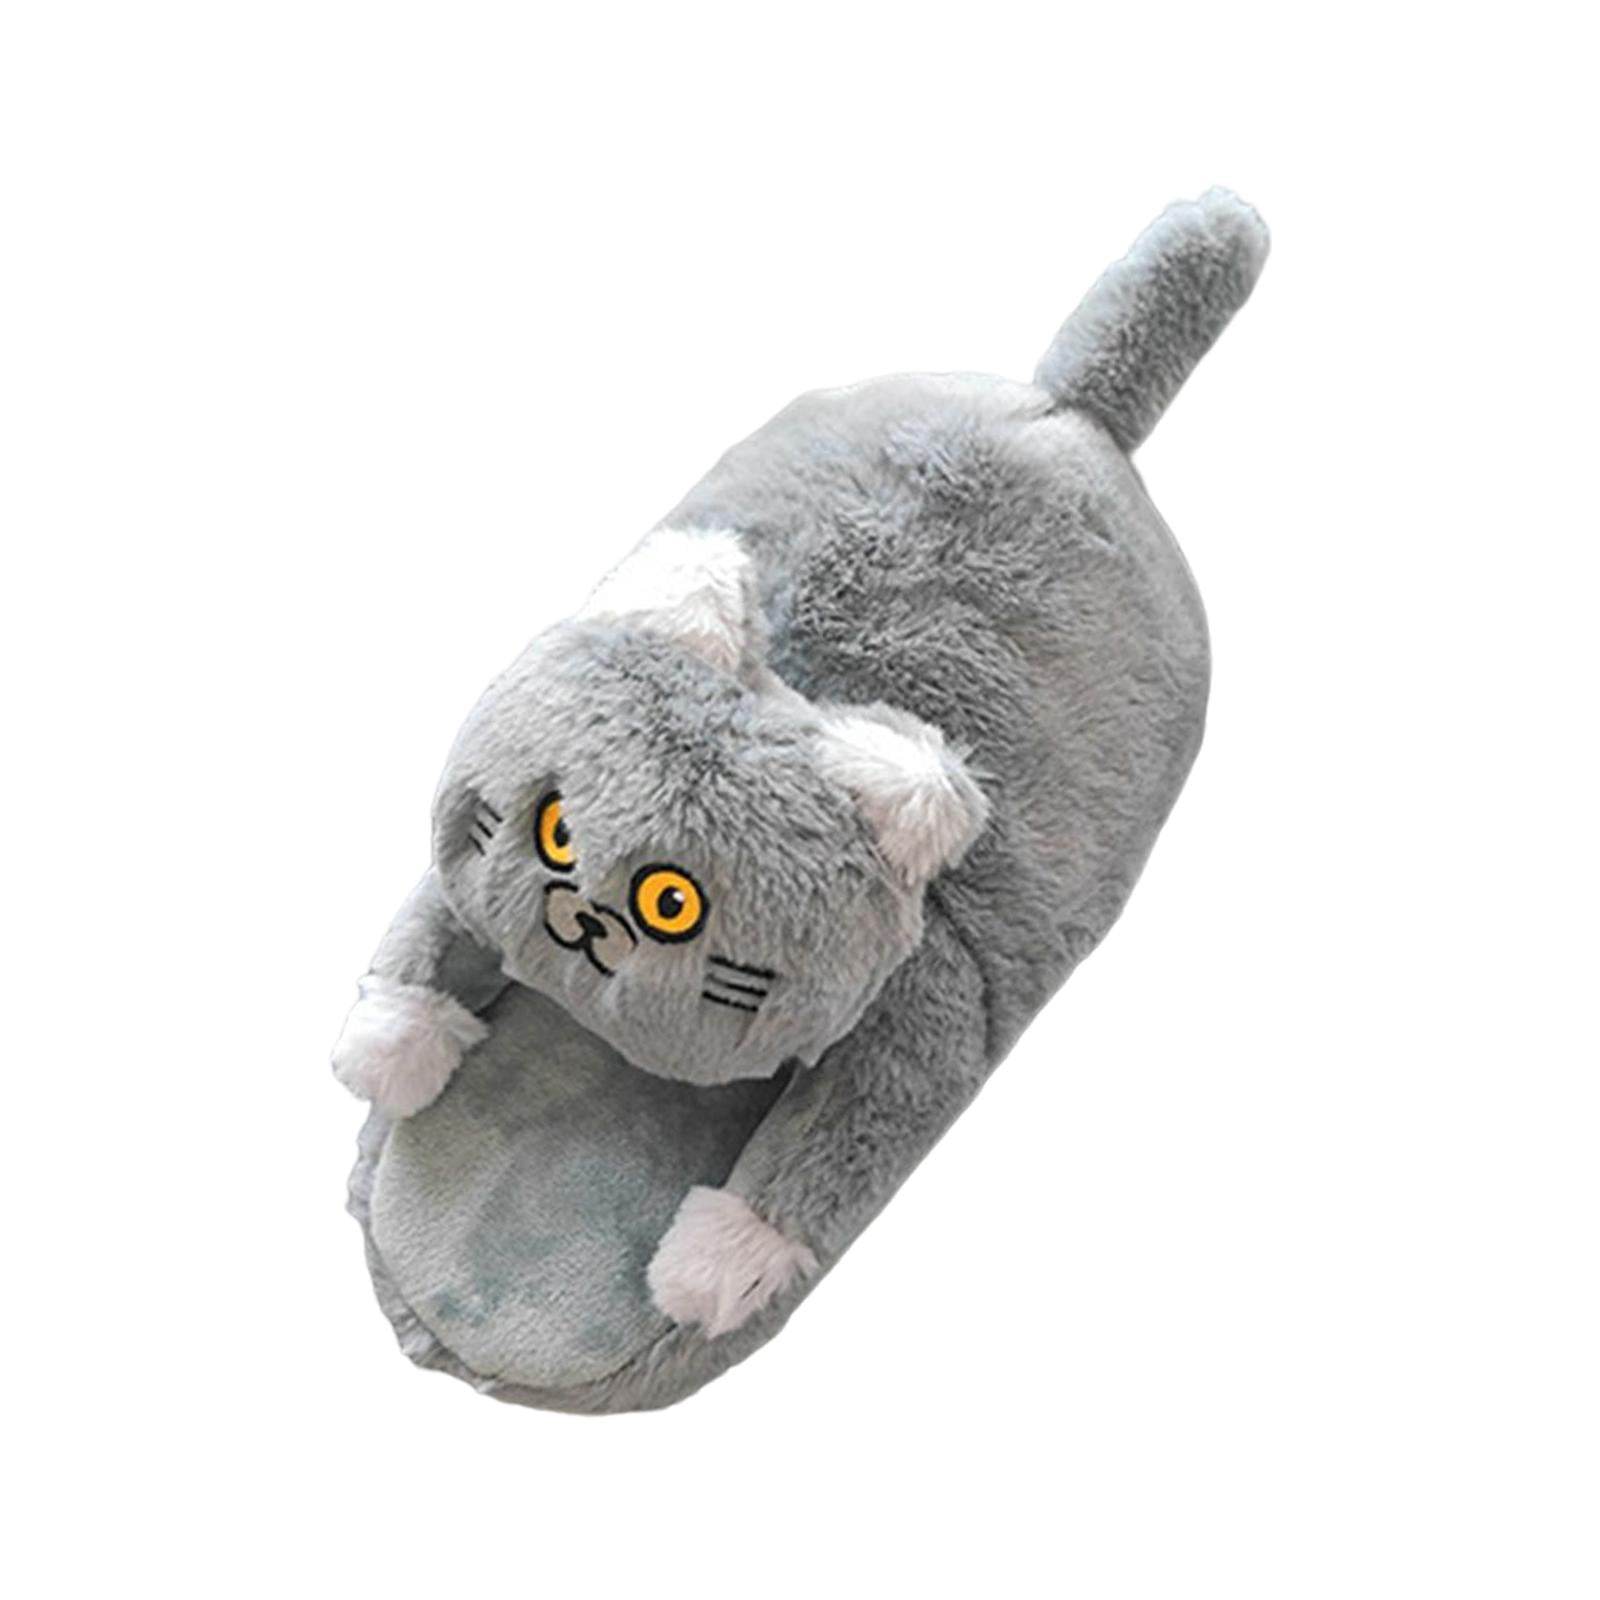 Mammoet kapitalisme Afdeling Winter Plush Slippers Skid Cuddly Hug Cat Indoor Slippers Floor Shoes Size  Cozy Creative Gifts Funny House Slippers for Mom Wife , Grey - Walmart.com